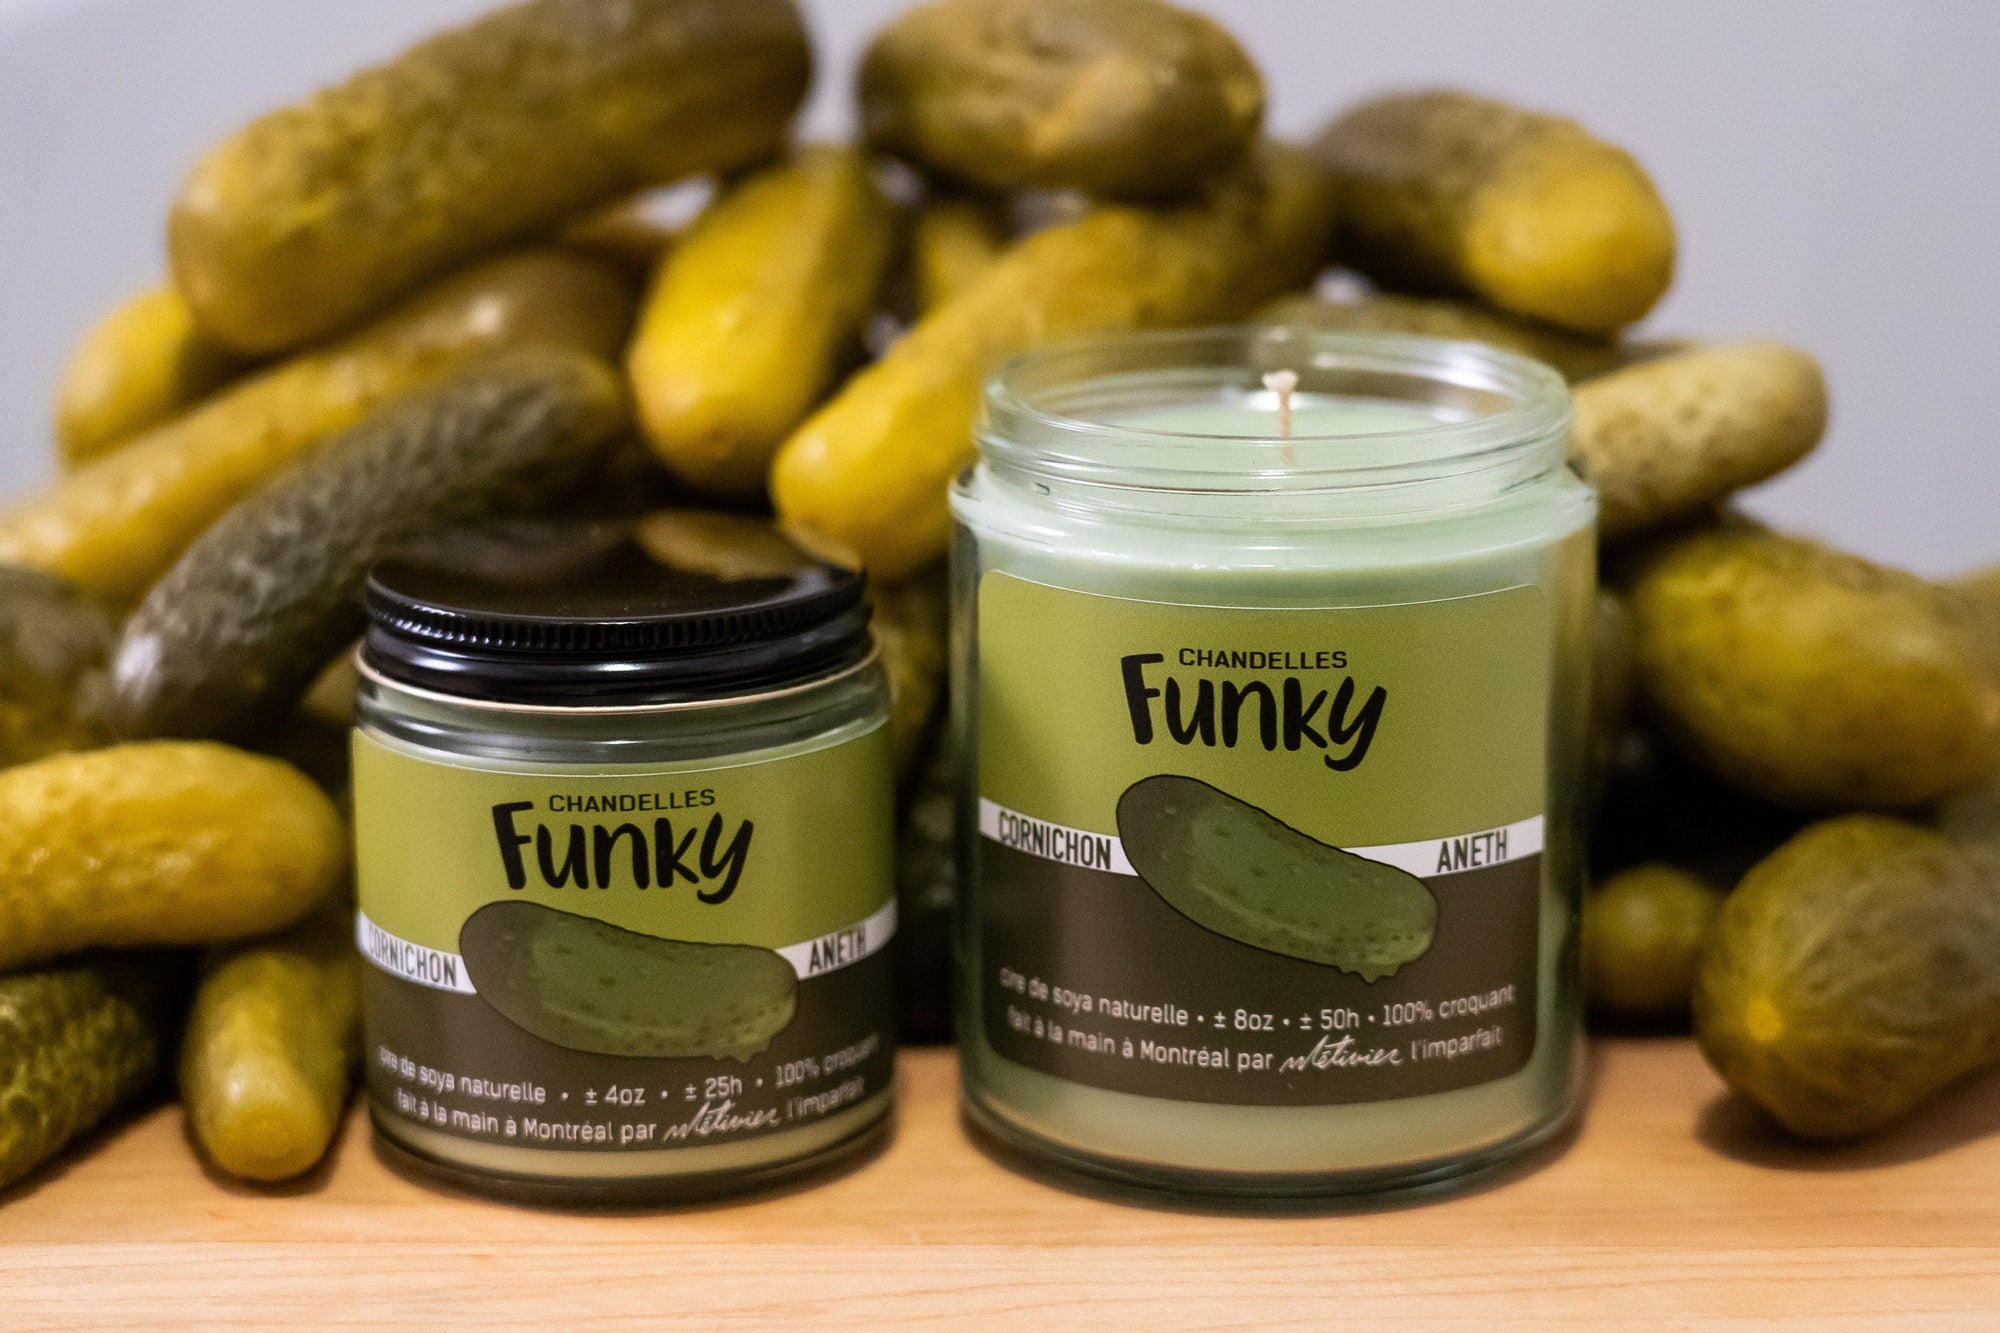 Chandelle Cornichon Aneth - Dill pickle - Funky - Funky & Co.